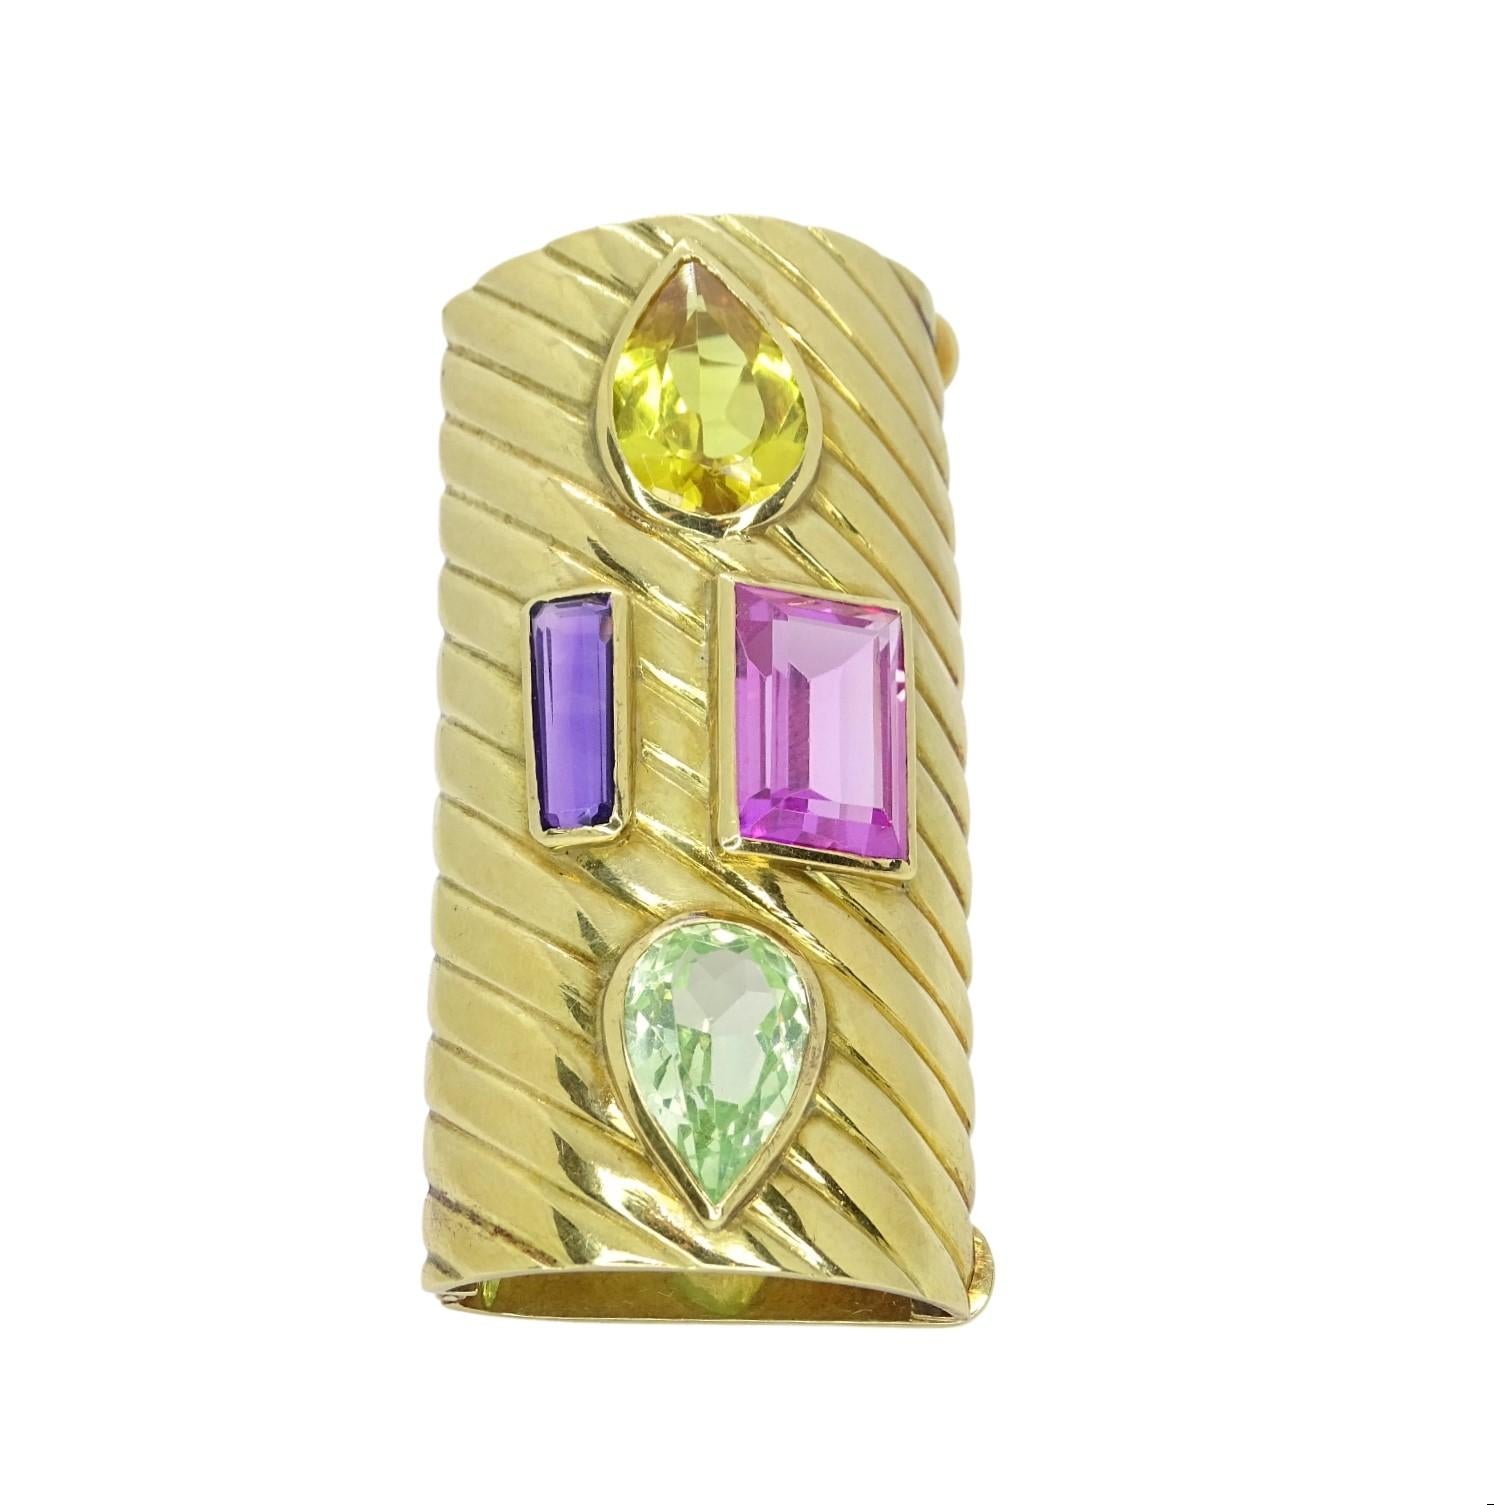 One of a kind necklace or brooch or pendant holder, Art Deco style, French high quality  jewelry, 70s SXX.
With a rectangular and convex profile on 18 kt gallon gold, 4 semi-precious stones are expressed inlaid: amethyst, topaz, French rose and